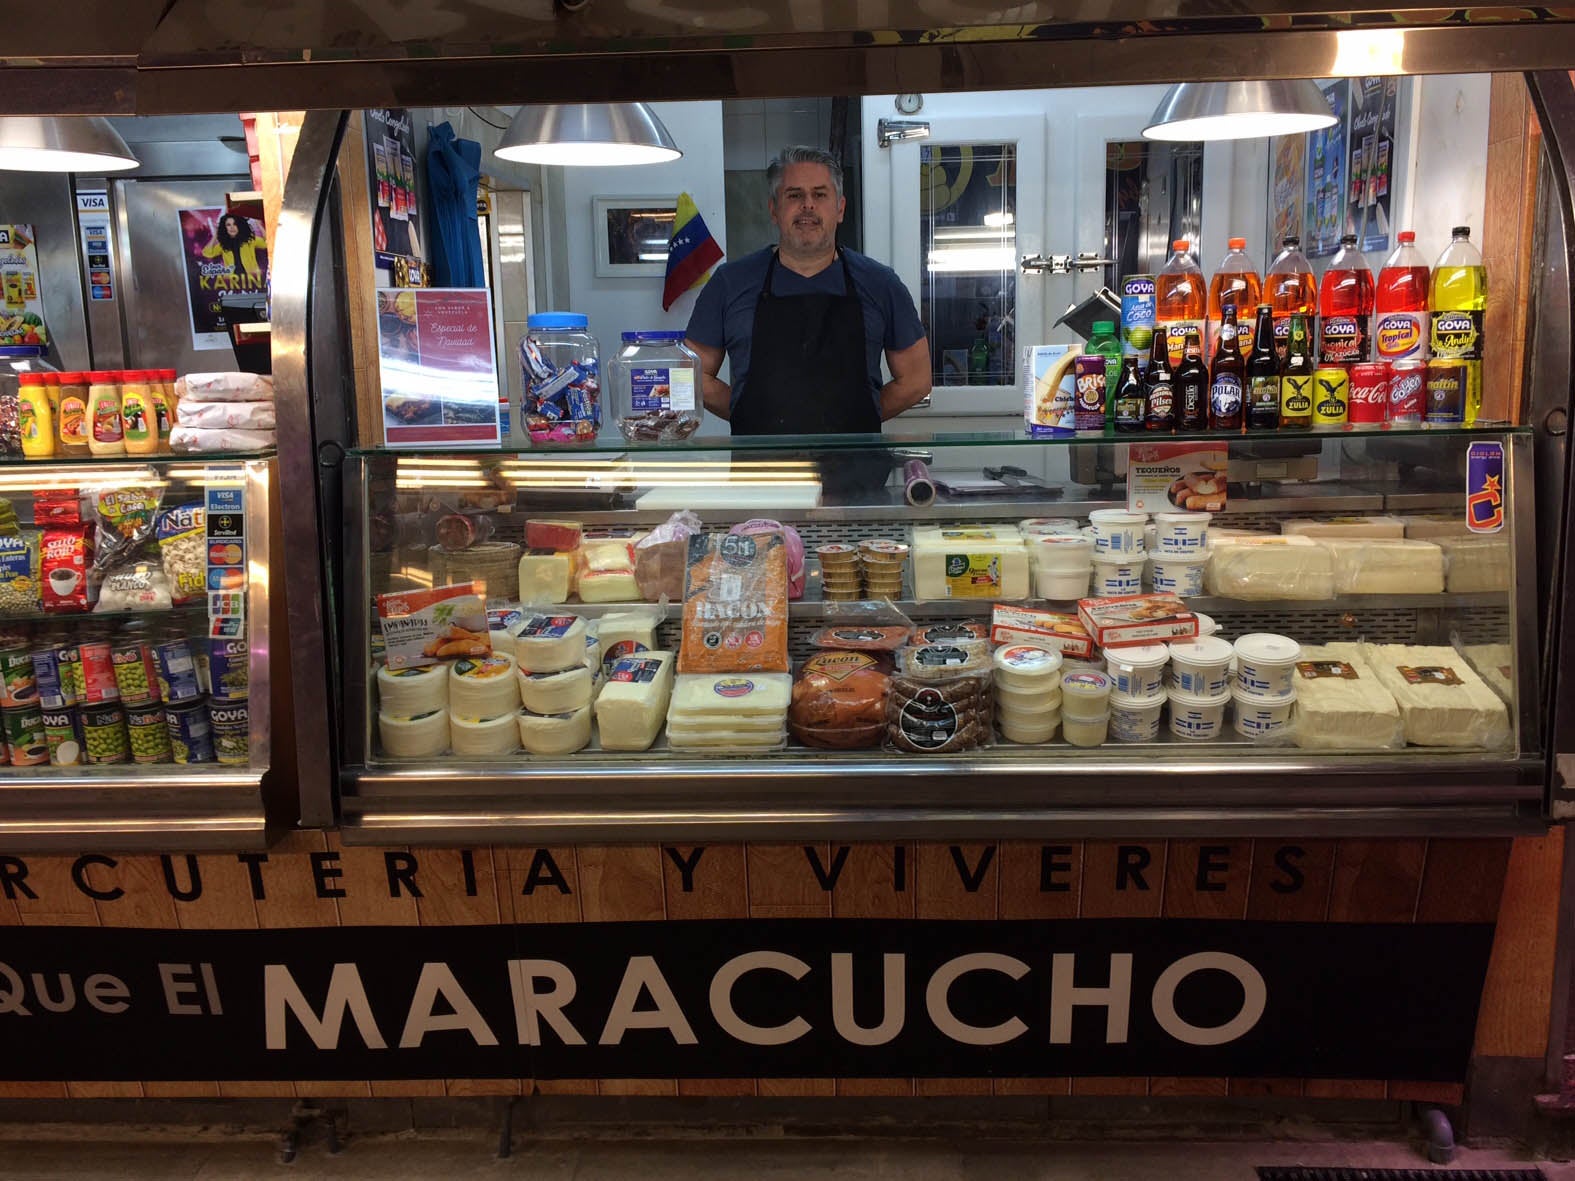 The Mercado de Maravillas market in Madrid has become one of Europe’s largest outposts for Venezuelans making the food of their home country